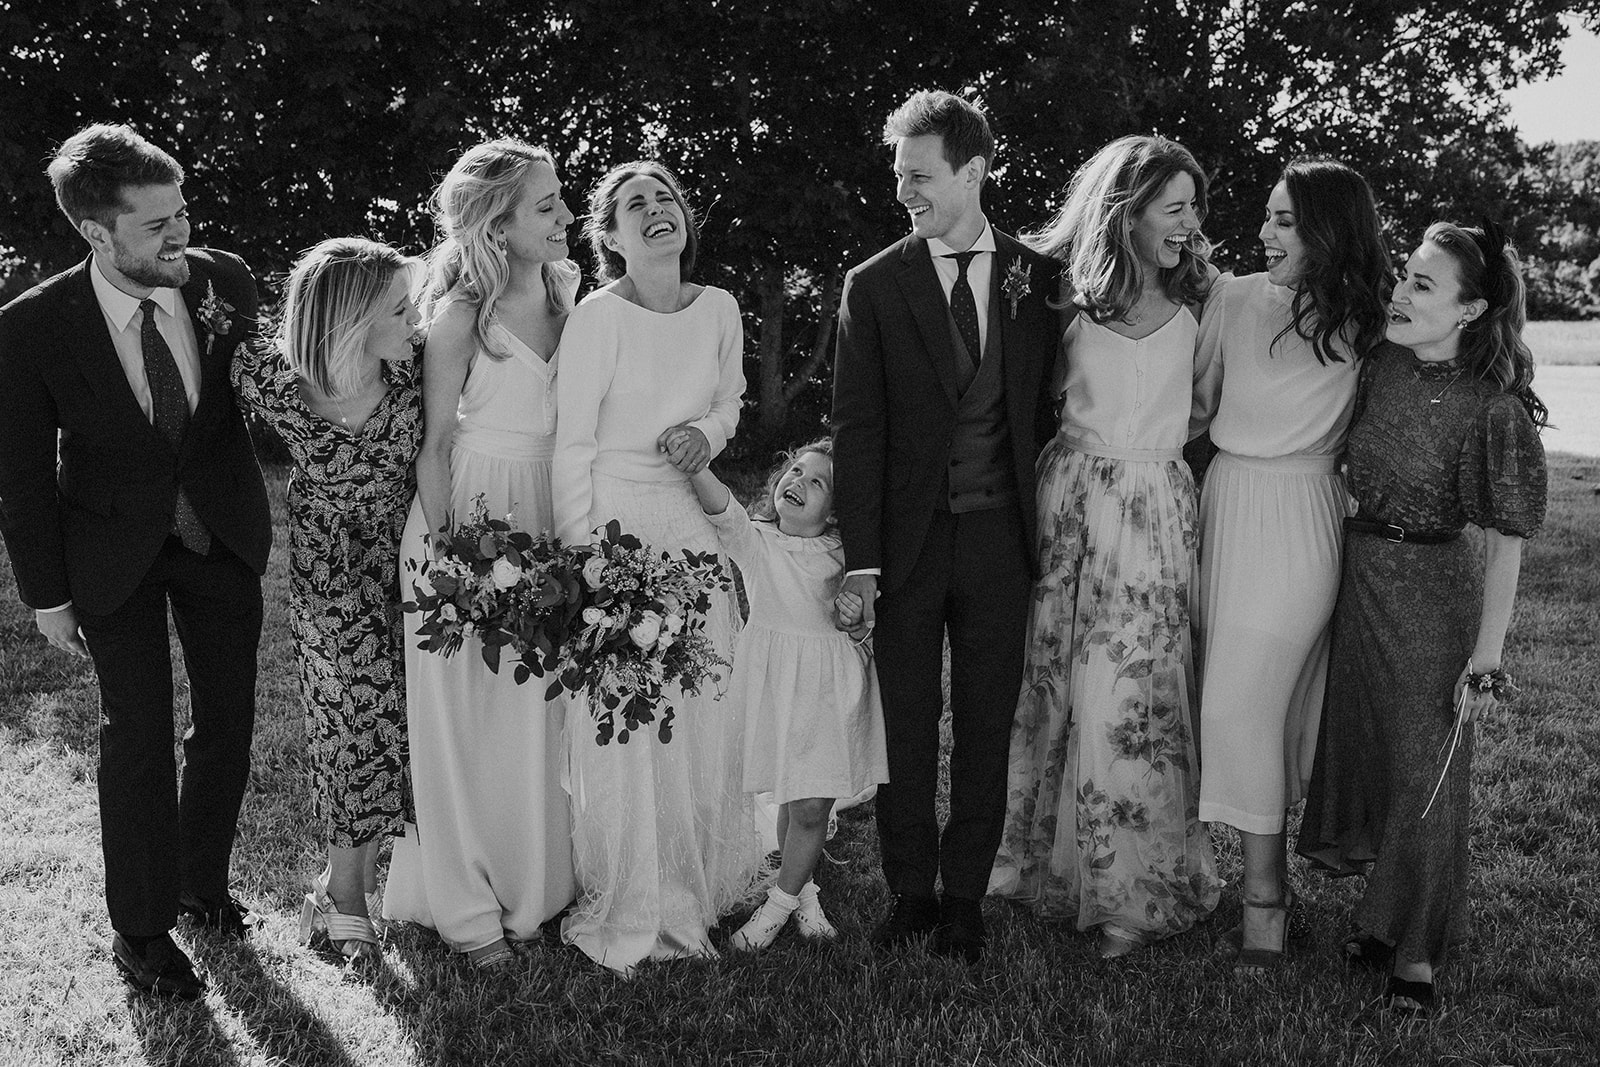 Candid group photo of a bride and groom with their close family during their french wedding